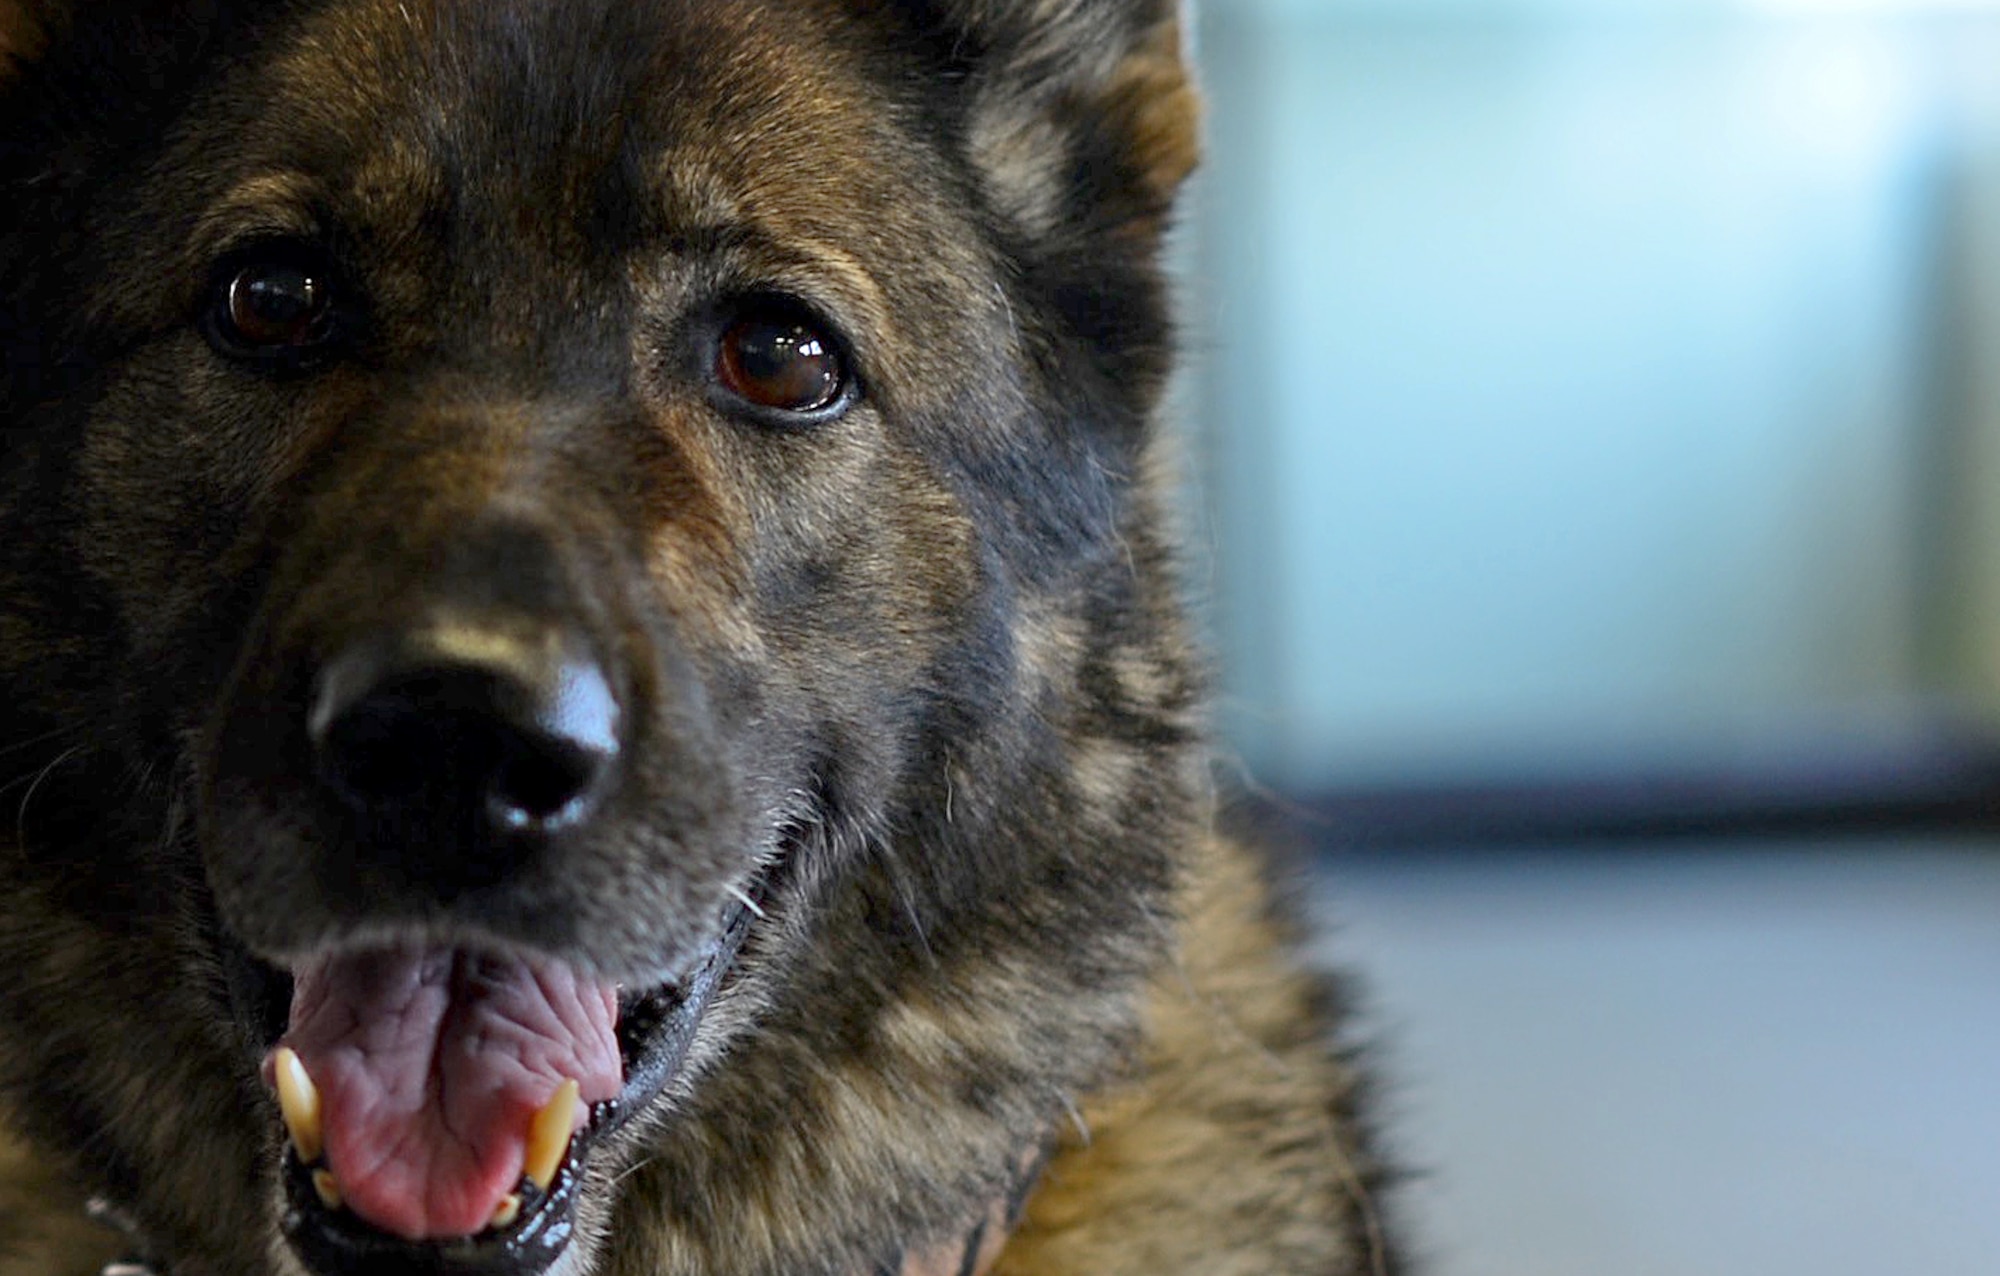 Gina, a 48th Security Forces Squadron military working dog, works on Royal Air Force Lakenheath, England. Gina was recently cleared to return to duty after undergoing a surgery to have a cancerous tumor removed from her mouth. (U.S. Air Force photo/Senior Airman Erin Trower)